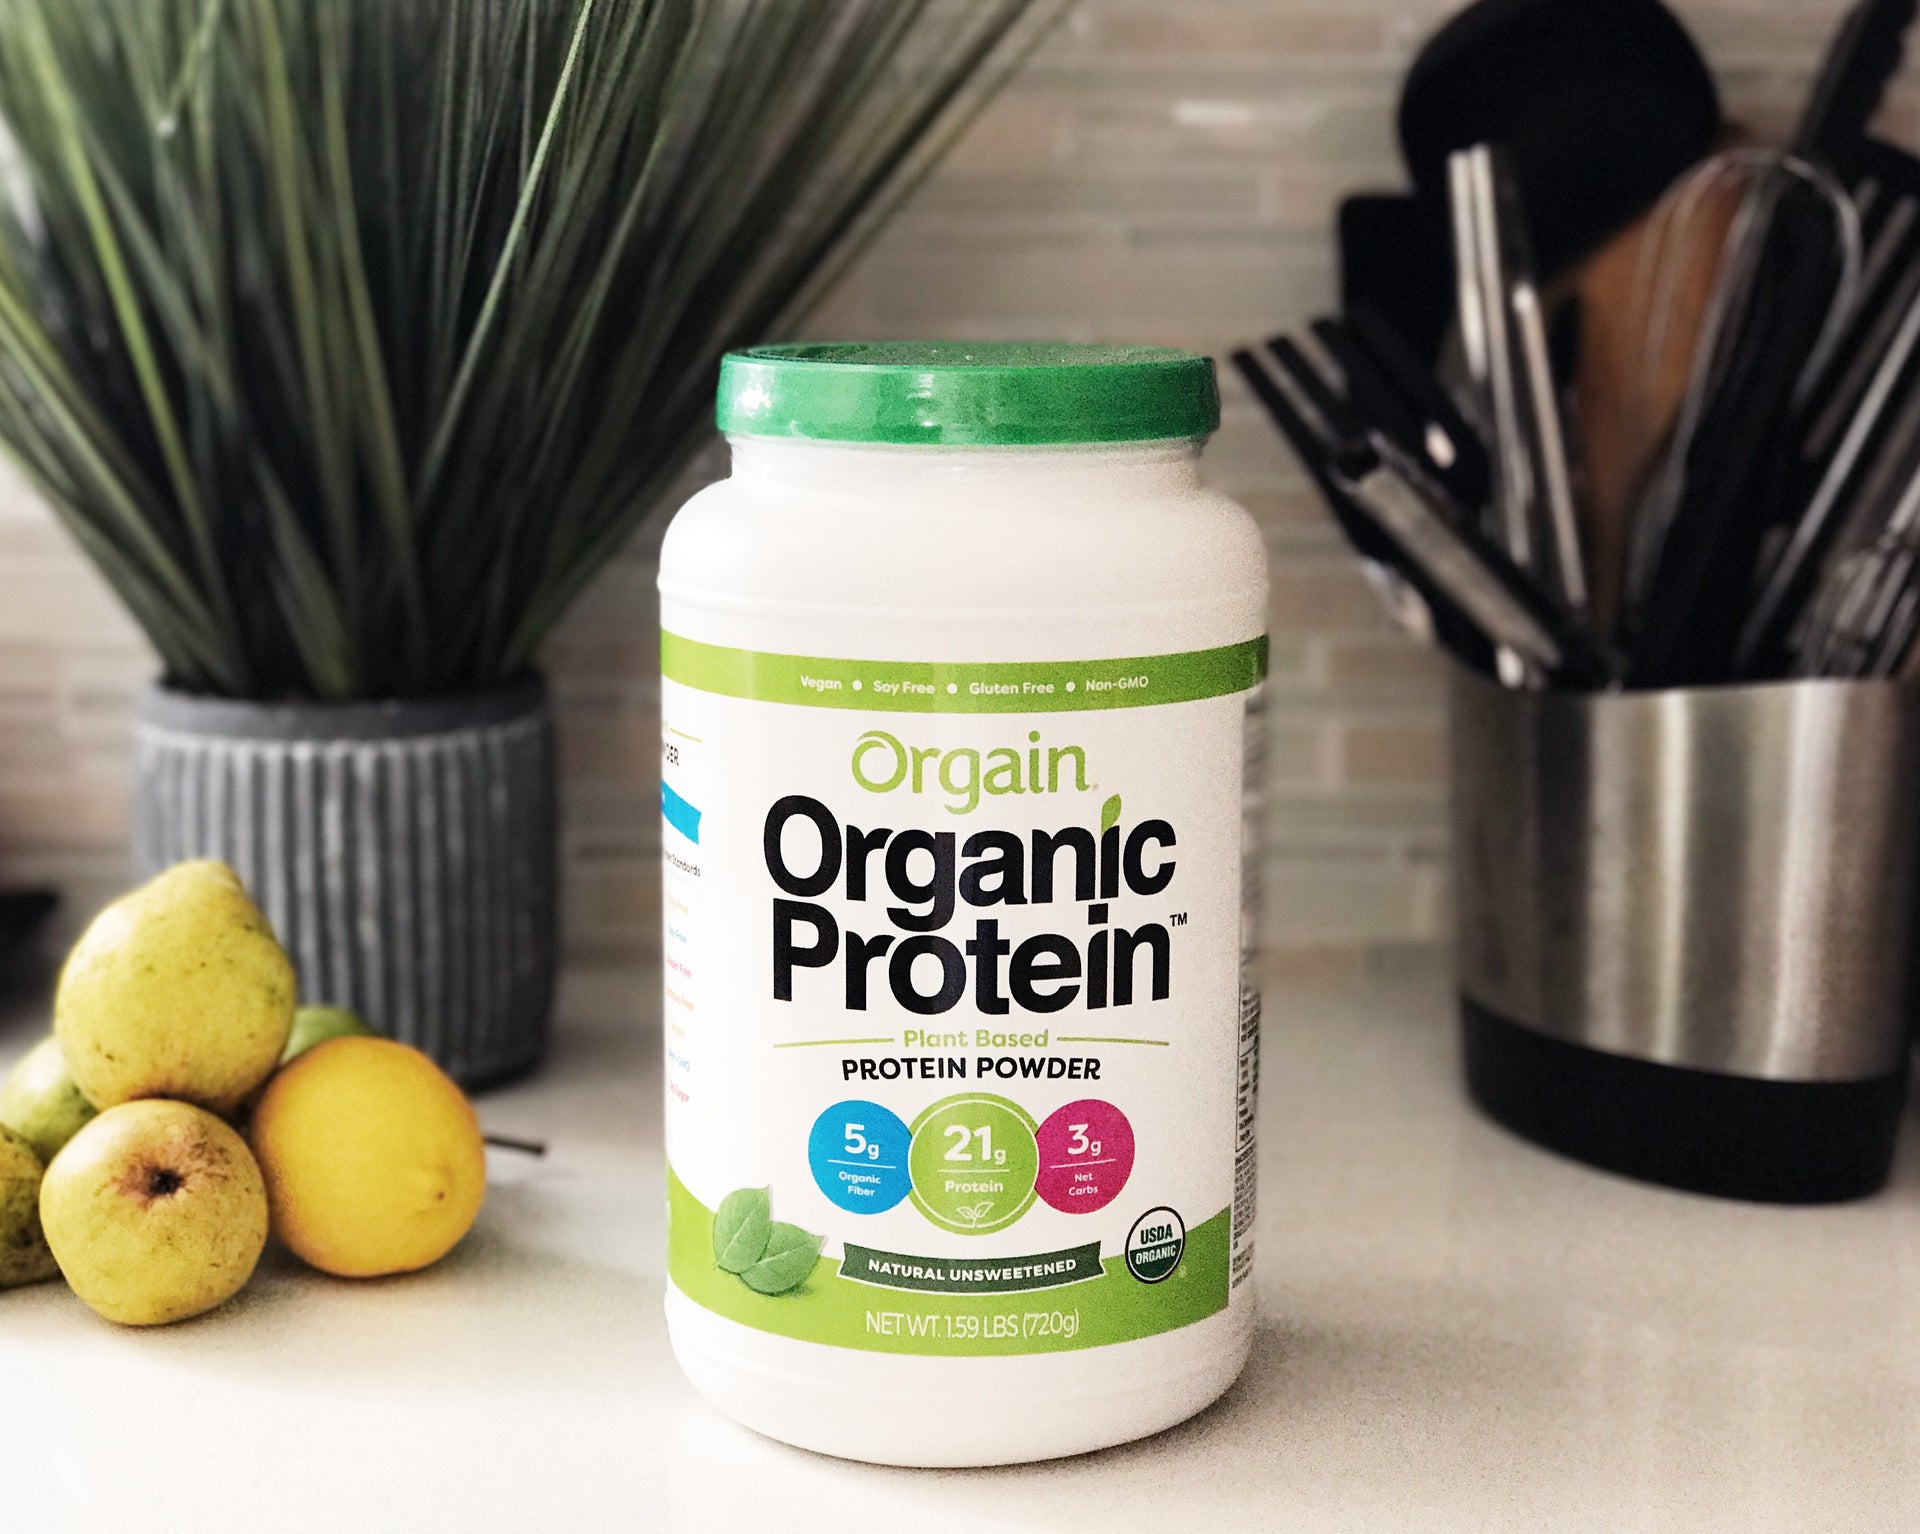 New Natural Unsweetened Plant Based Protein Powder!